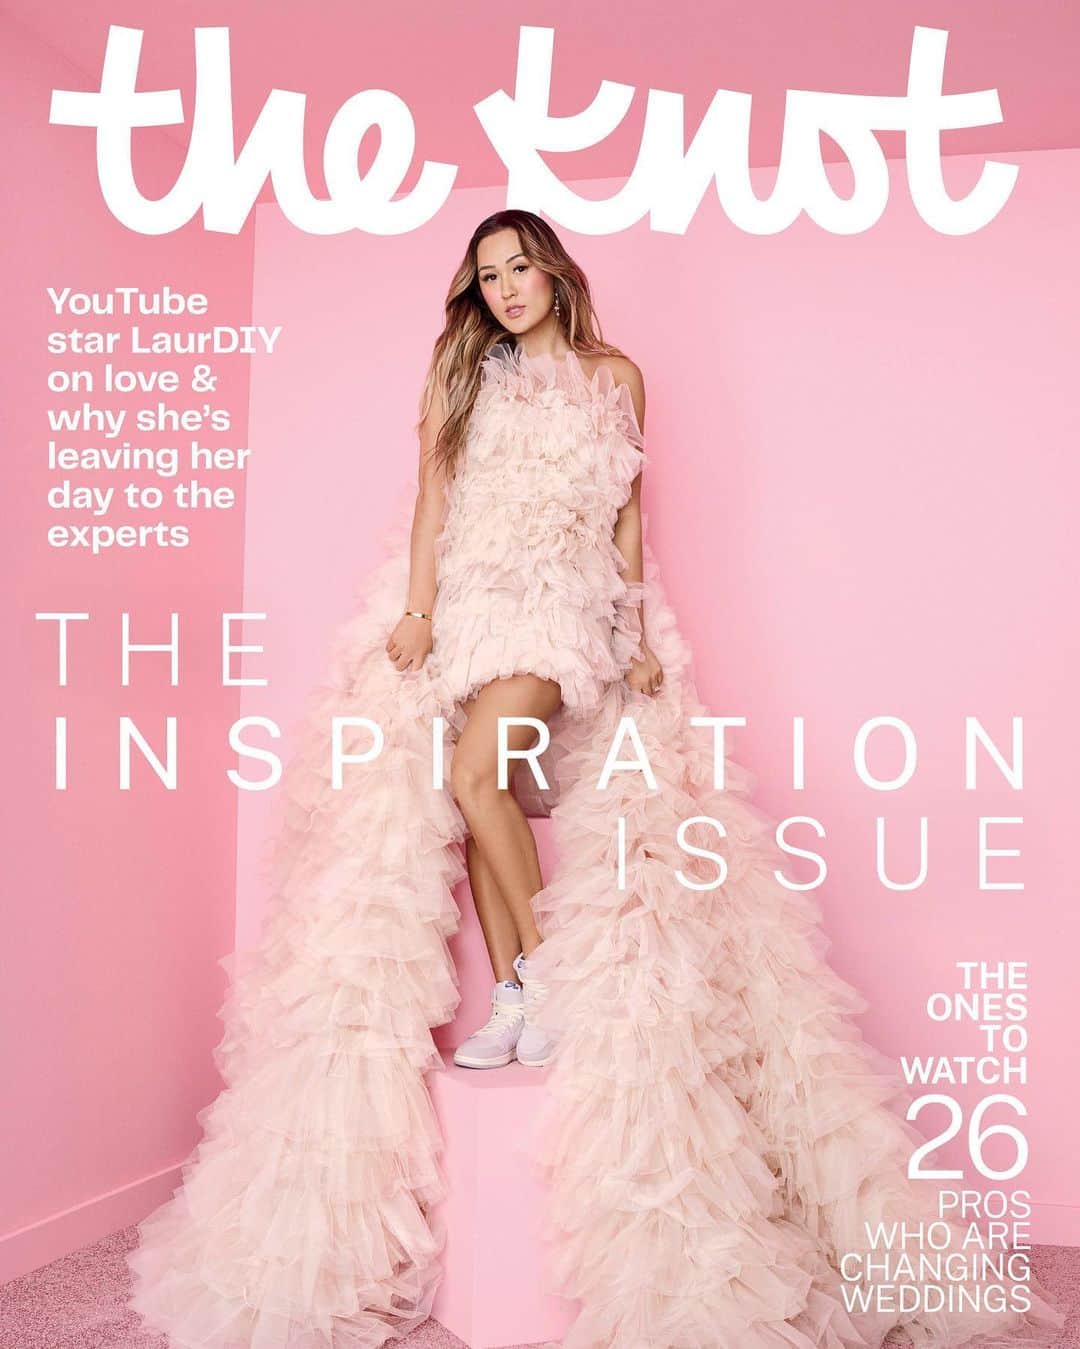 Lauren Riihimakiのインスタグラム：「All it took was a first date and the rest was history for @LaurDIY and fiancé @jeremymichael22. ✨ For The Knot’s inspiration issue, we caught up with crafter, content creator and entrepreneur LaurDIY on why she isn’t DIYing her wedding—but she can’t deny that in true LaurDIY fashion it will have “little DIY moments.” 🤍 Head to the link in bio to purchase or subscribe to The Knot Magazine. Our inspiration issue is on stands now—and we have all the tea on 2023 runway trends, rings, the best florals based on seasons, our first ever Ones to Watch list honoring emerging pros who are changing the wedding industry, and so much more.  Photography: @ericraydavidson Styling: @debbiehsieh Hair: @888dre Makeup: @bethanygmakeup Set Design: @artandset Production: @campproductions Cover Story Editor: @theestherlee Creative Director: @nathaliekirsheh Photo Producer: @LaurenKill」